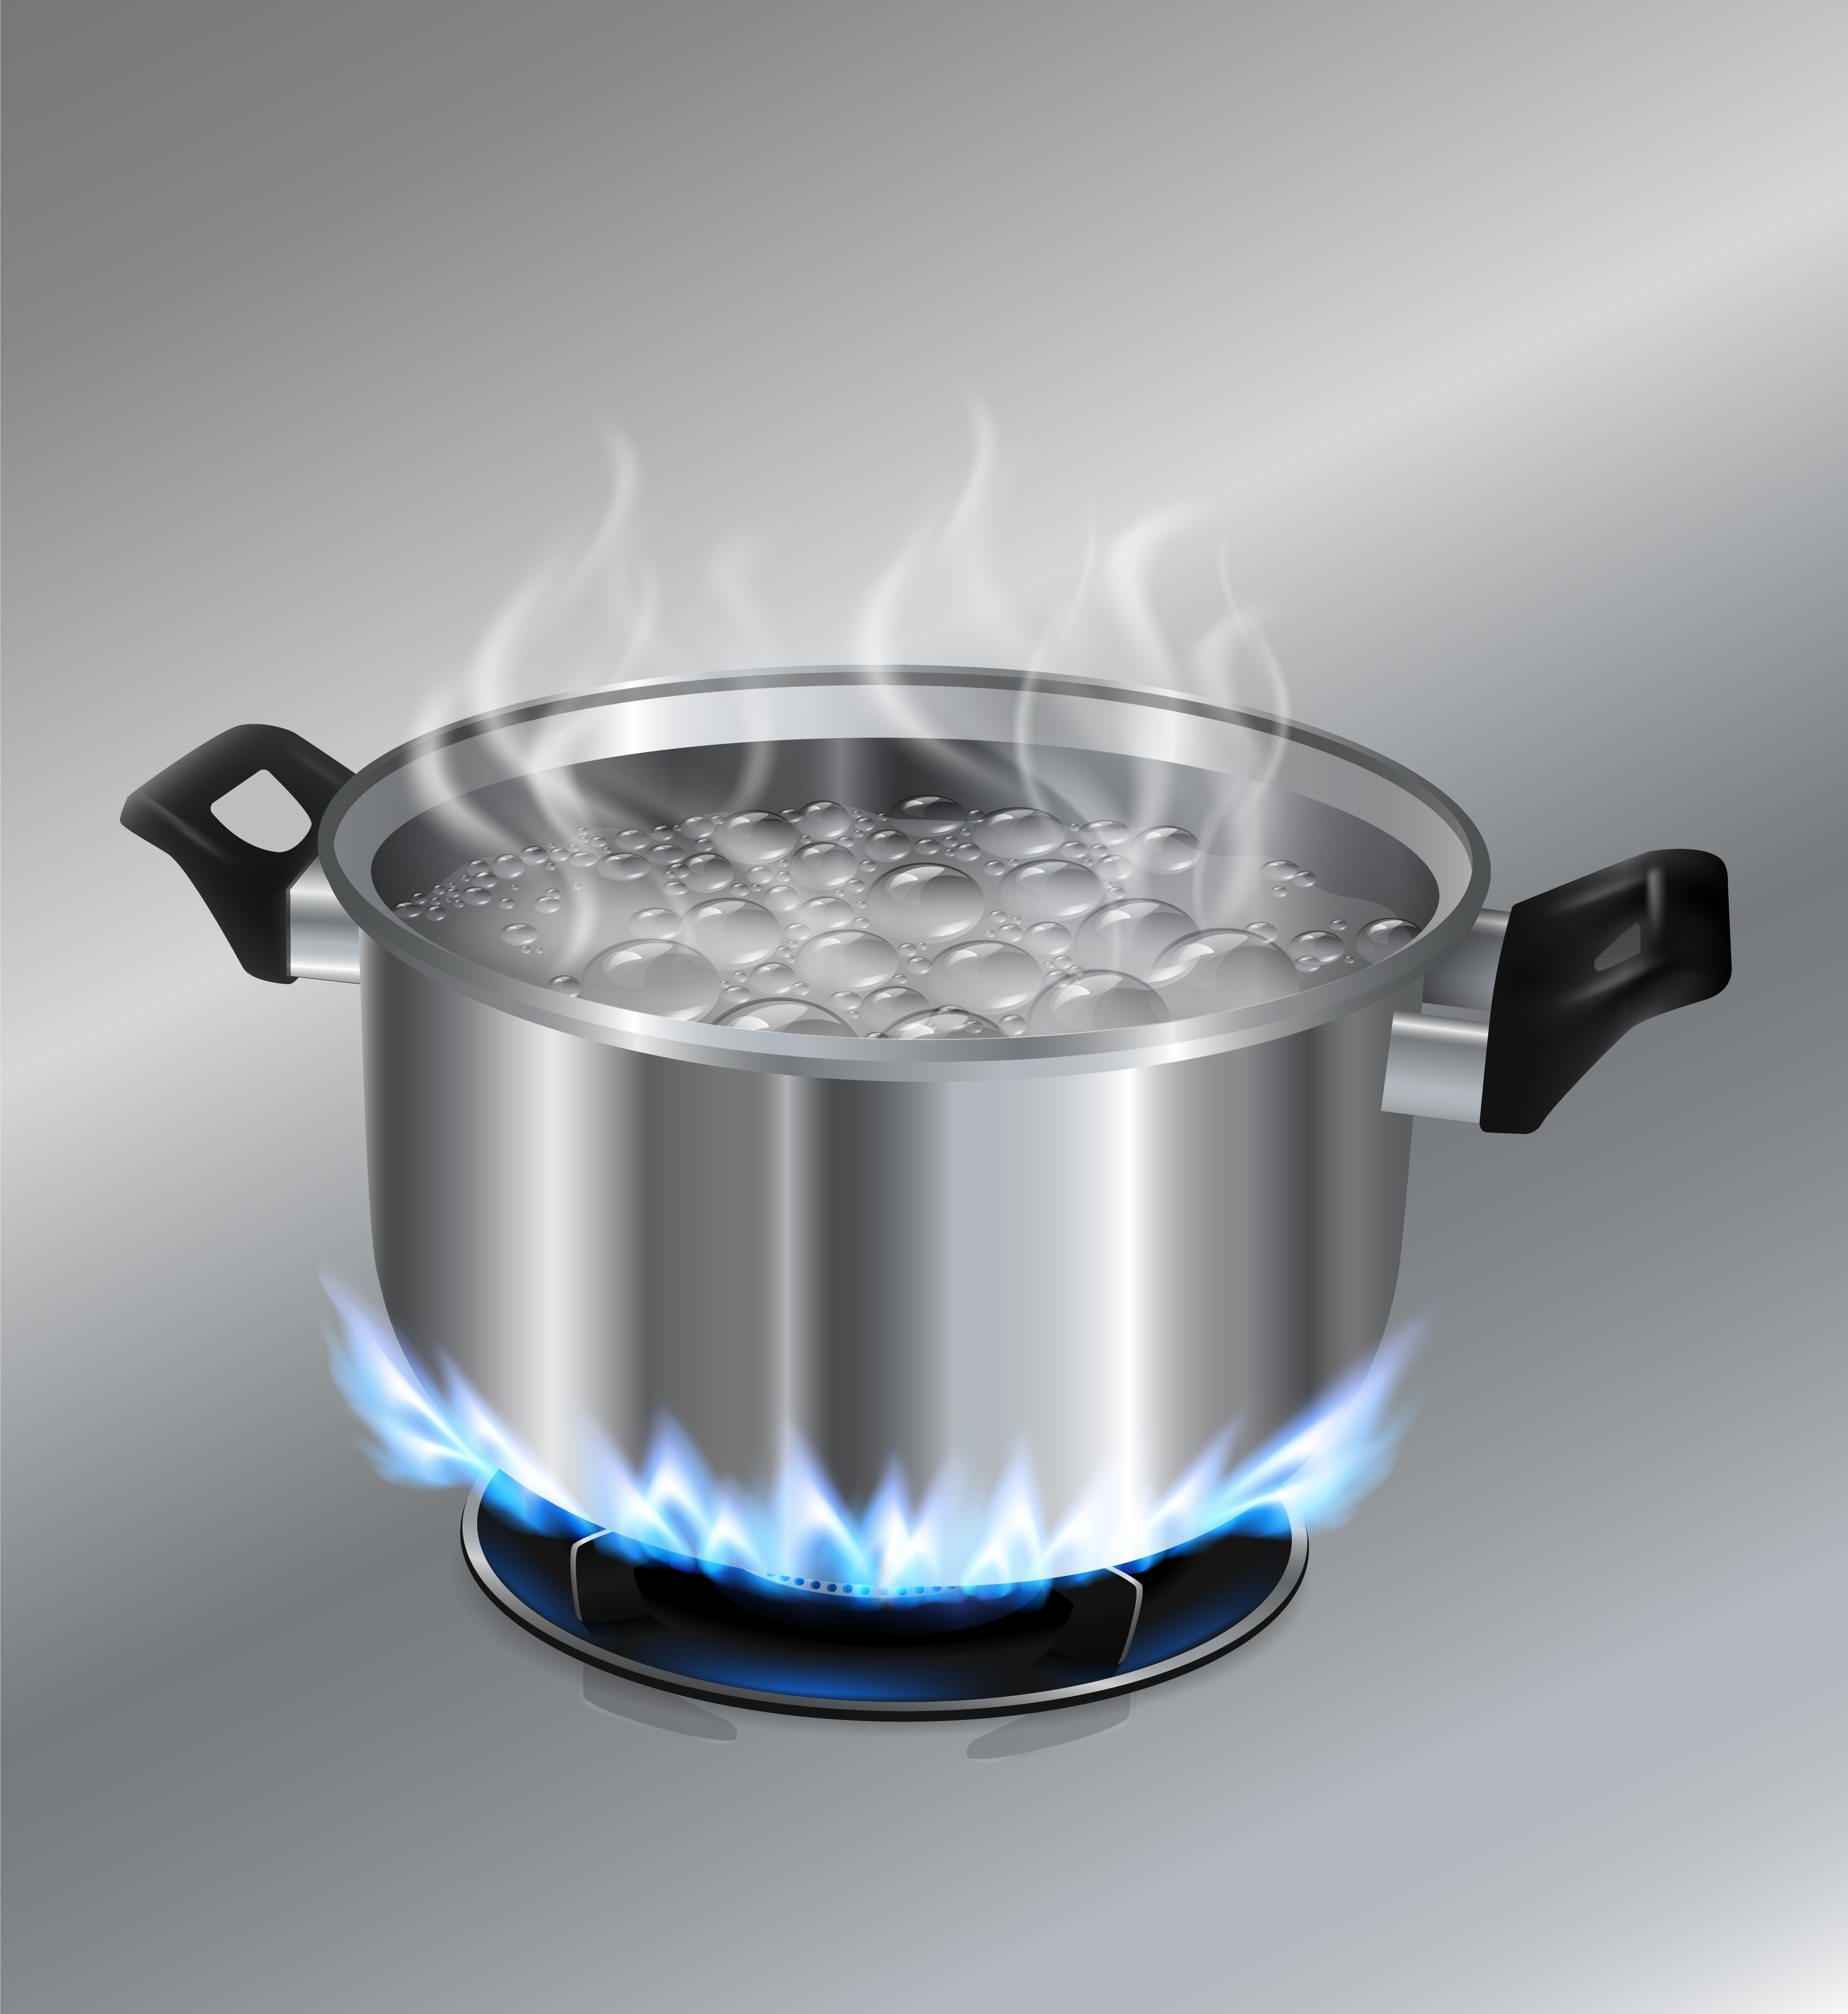 https://static.vecteezy.com/system/resources/previews/000/681/980/original/stainless-steel-pot-with-boiling-water-on-gas-stove.jpg